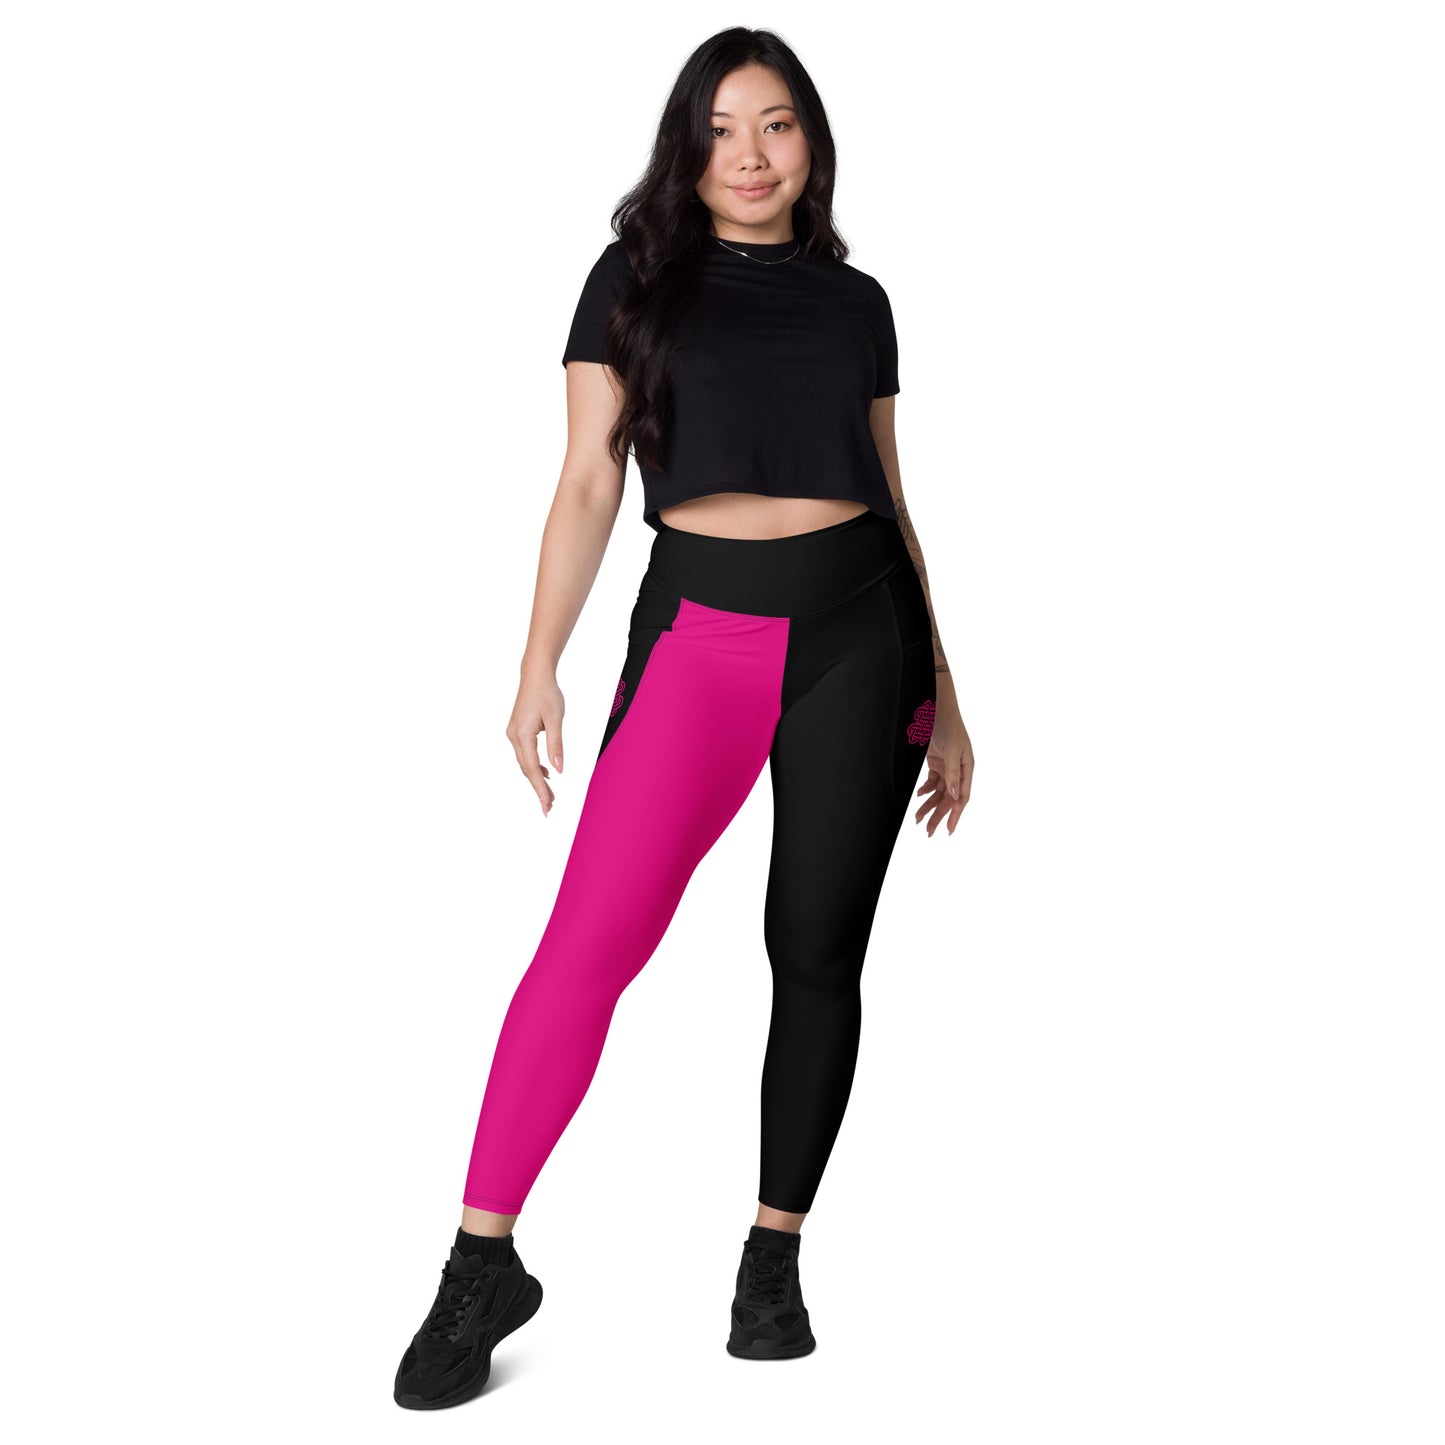 Shadows One leg Leggings with pockets Pink